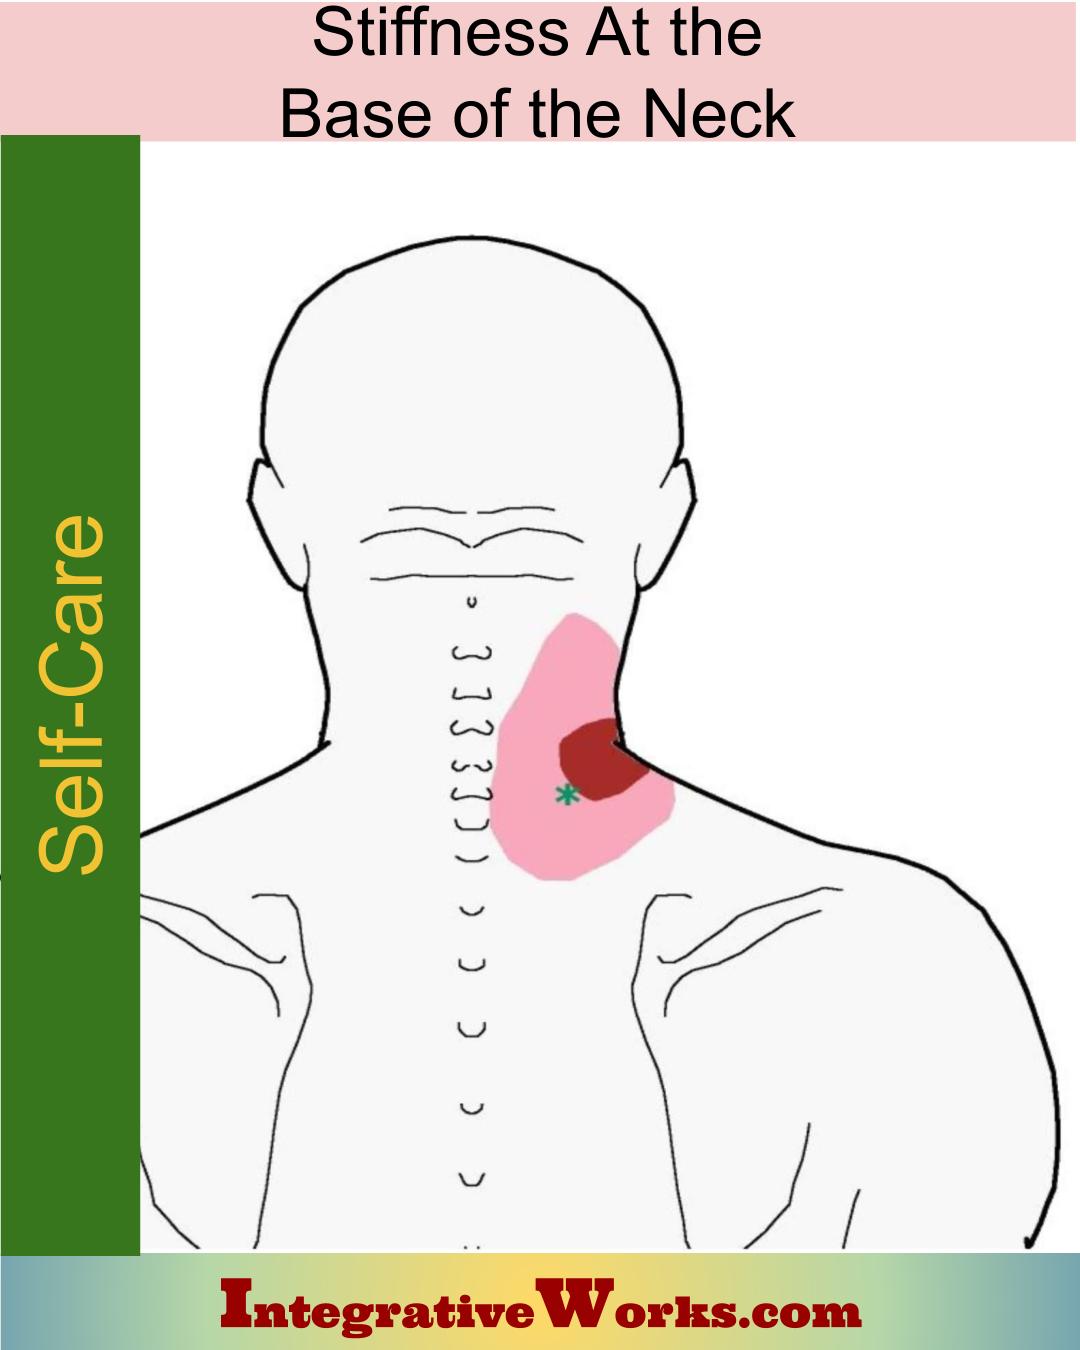 Self Care – Stiffness at the base of the neck